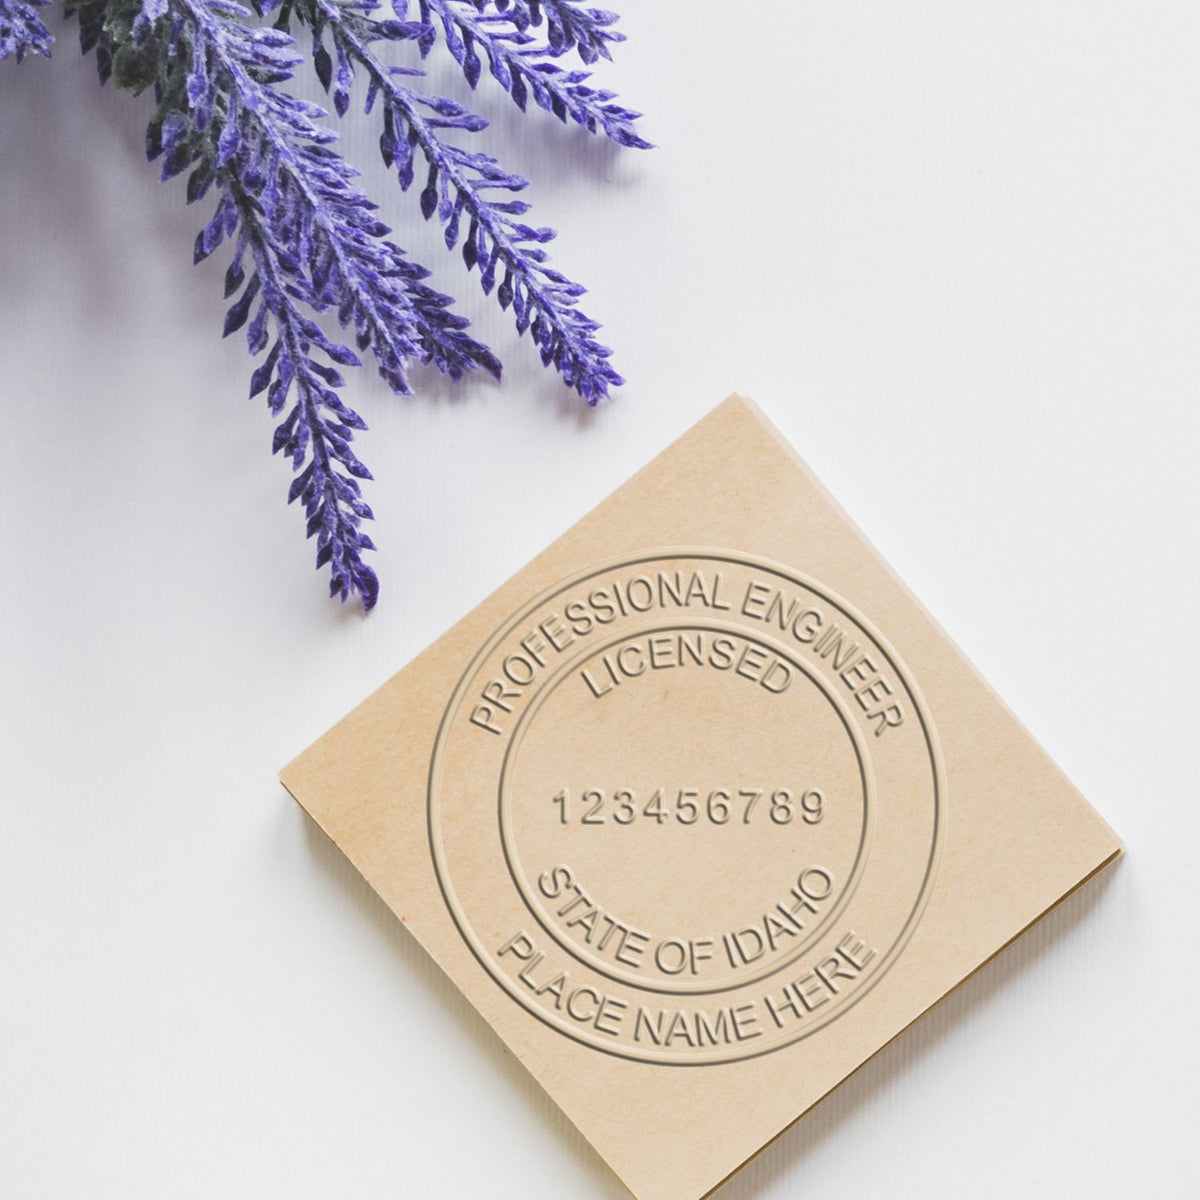 This paper is stamped with a sample imprint of the Idaho Engineer Desk Seal, signifying its quality and reliability.